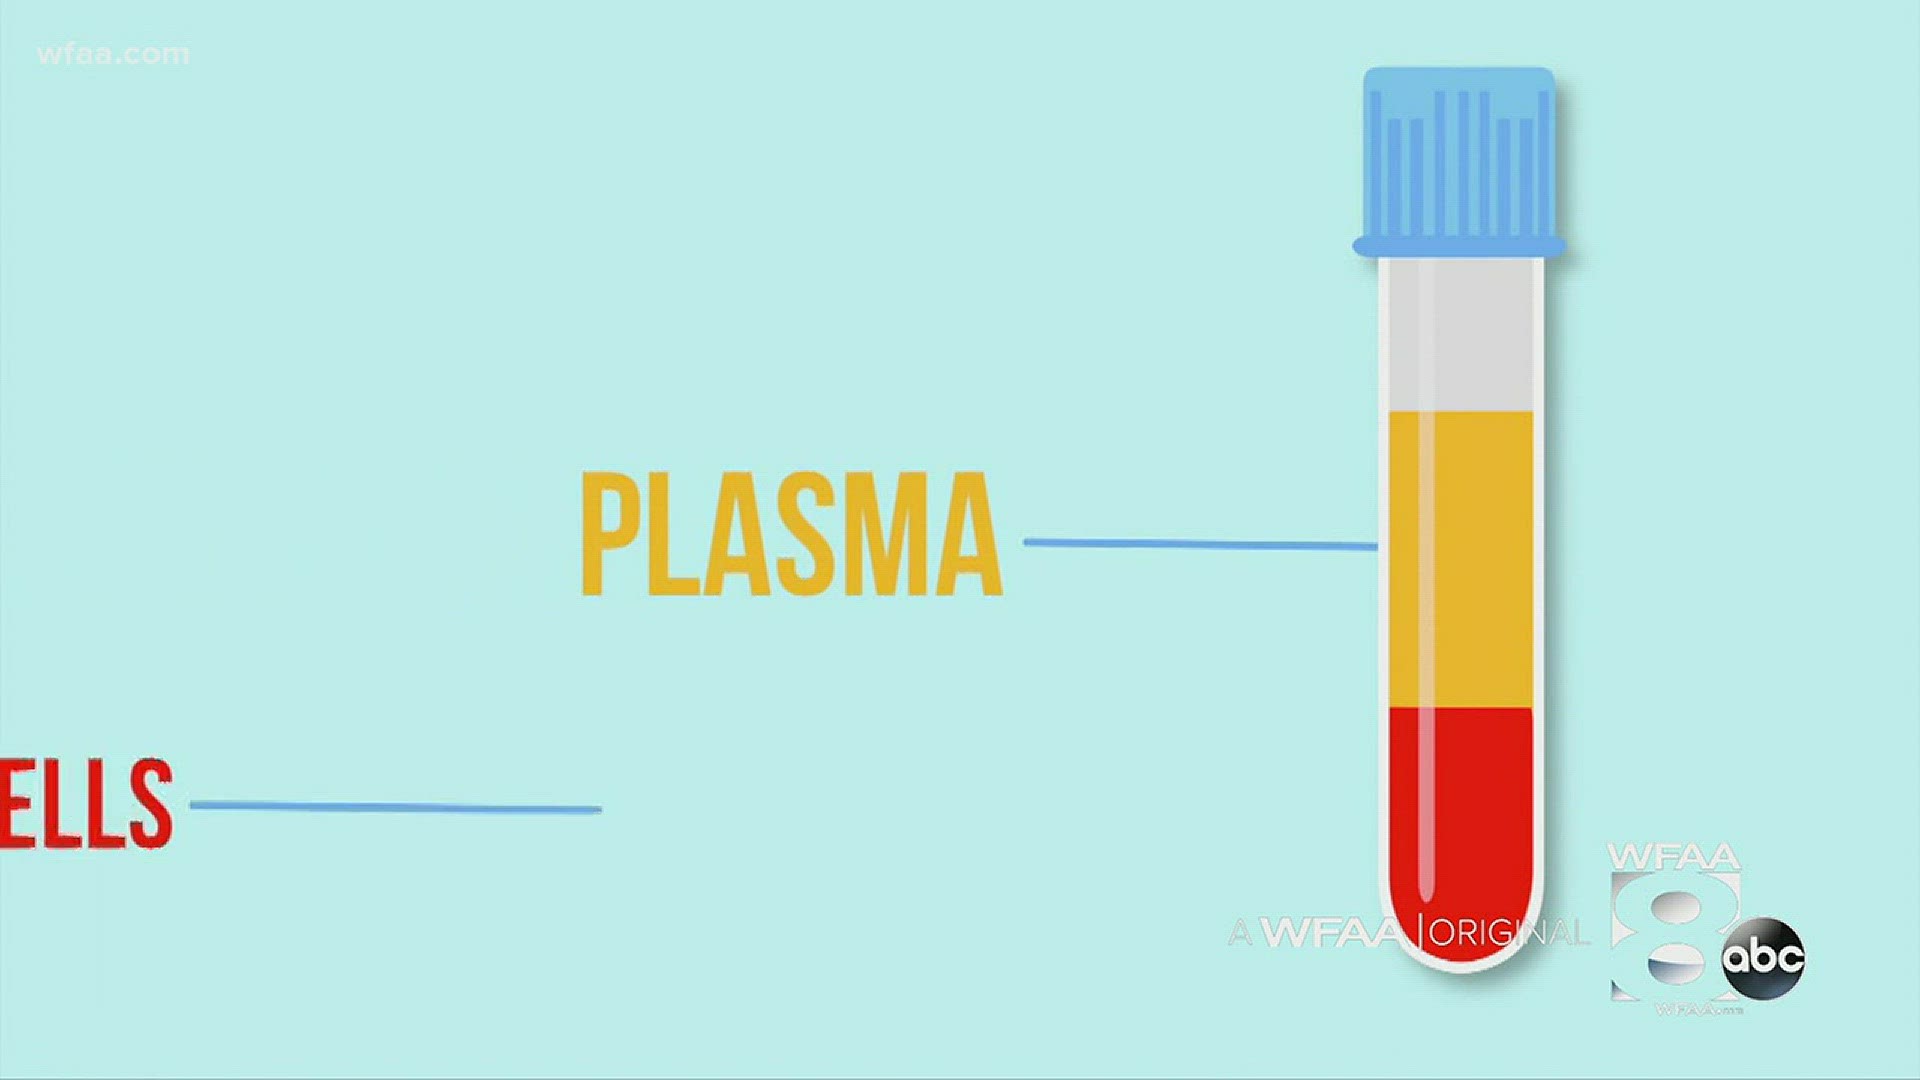 How plasma is being used to heal, rejuvenate